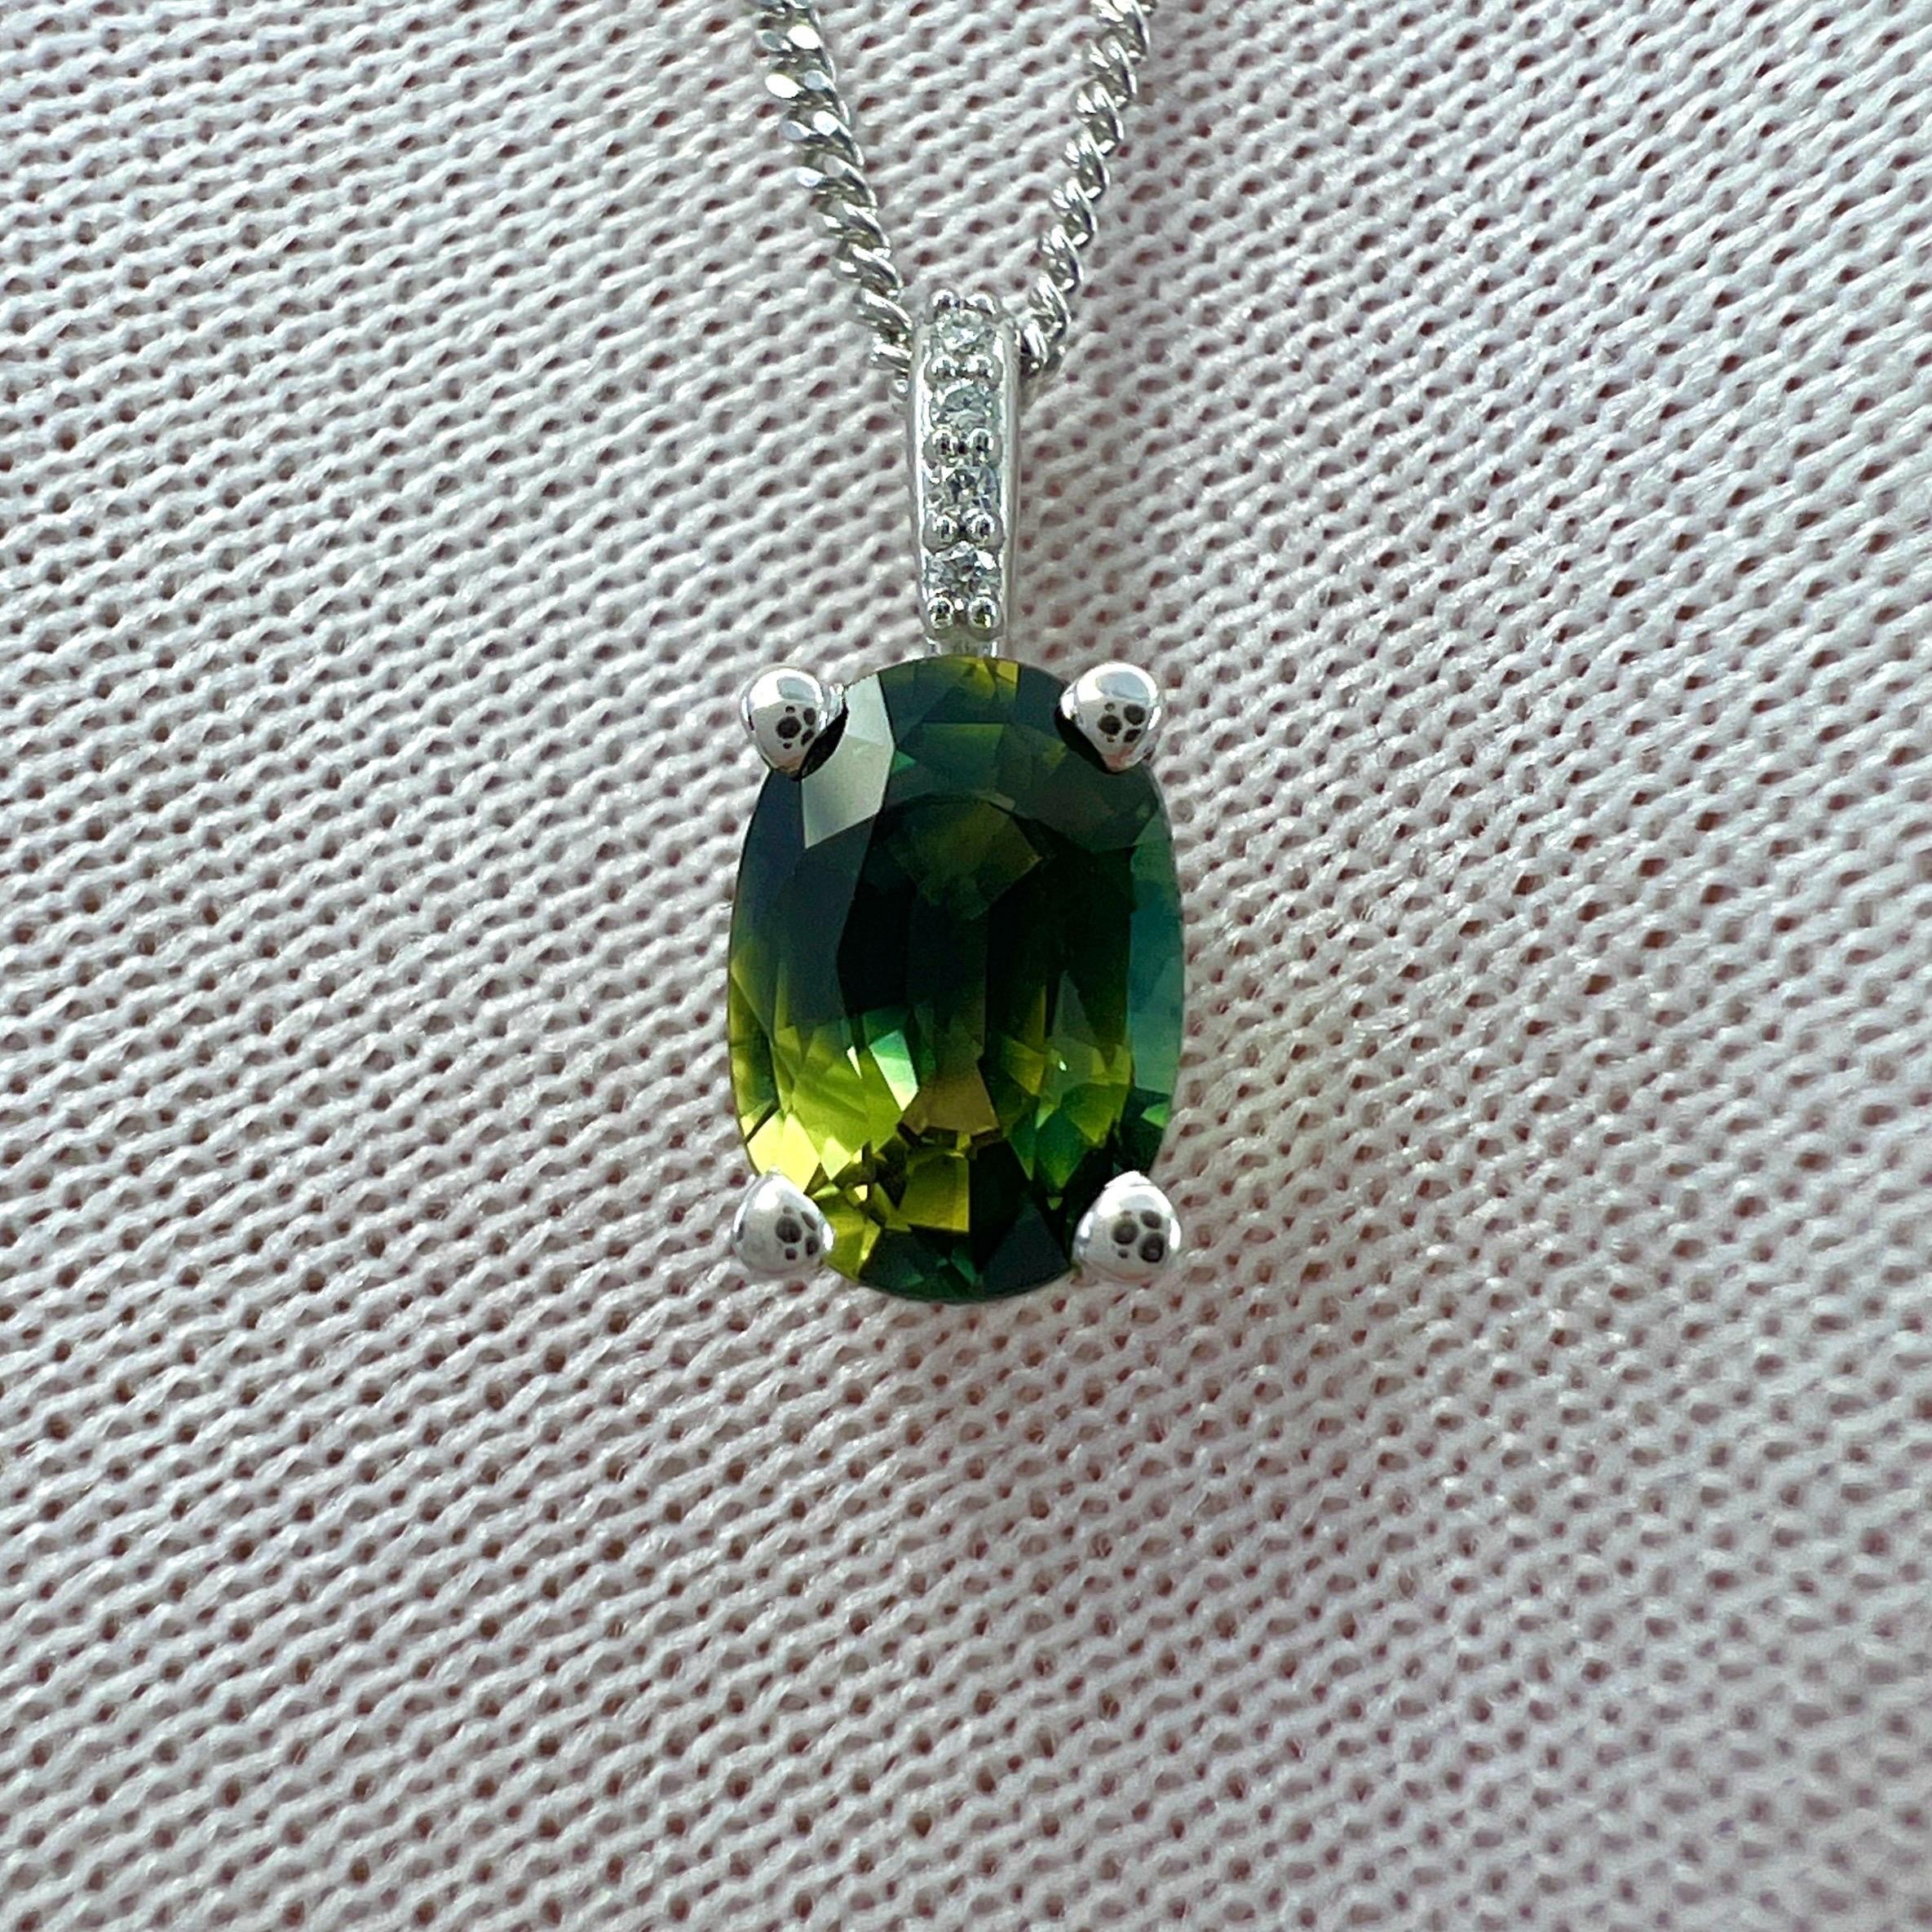 IGI Certified Green Yellow Blue Parti Colour Sapphire & Diamond 18k White Gold Hidden Halo Pendant Necklace.

1.01 Carat sapphire with a unique green yellow blue parti colour effect. Rare and stunning to see. This sapphire also has excellent